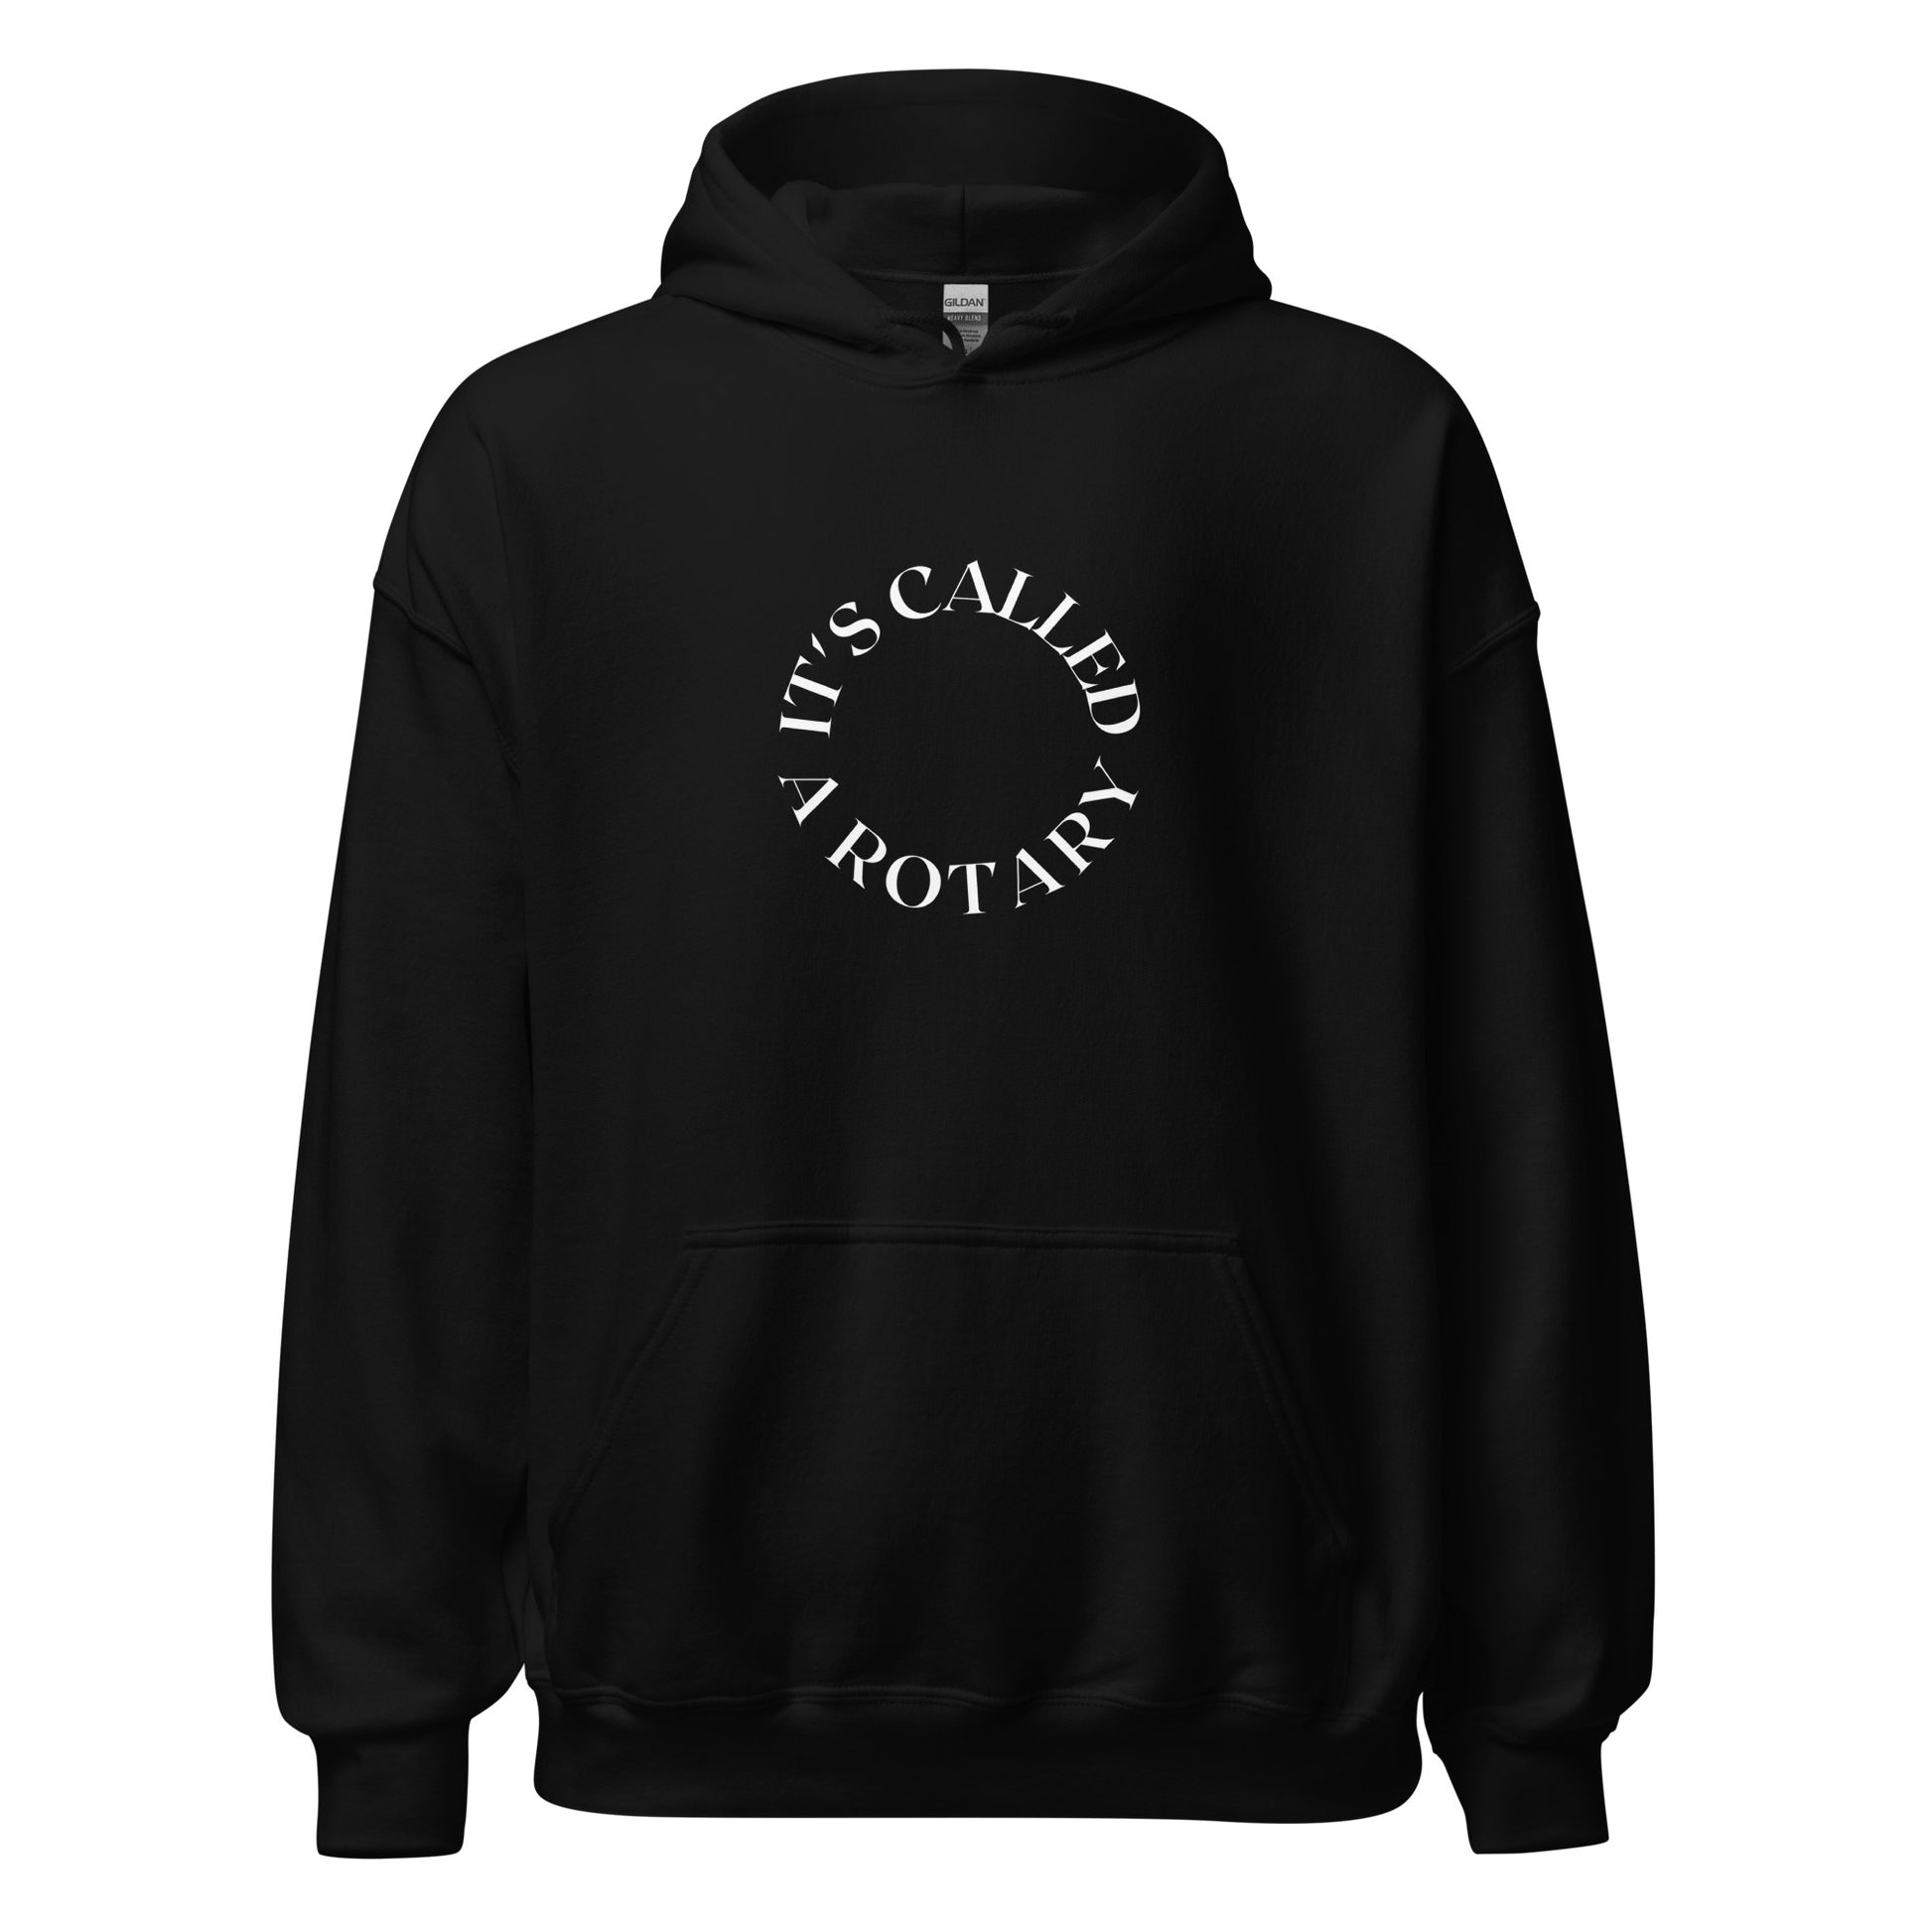 black hoodie that saying "it's called a rotary" in white lettering shaped in a circle